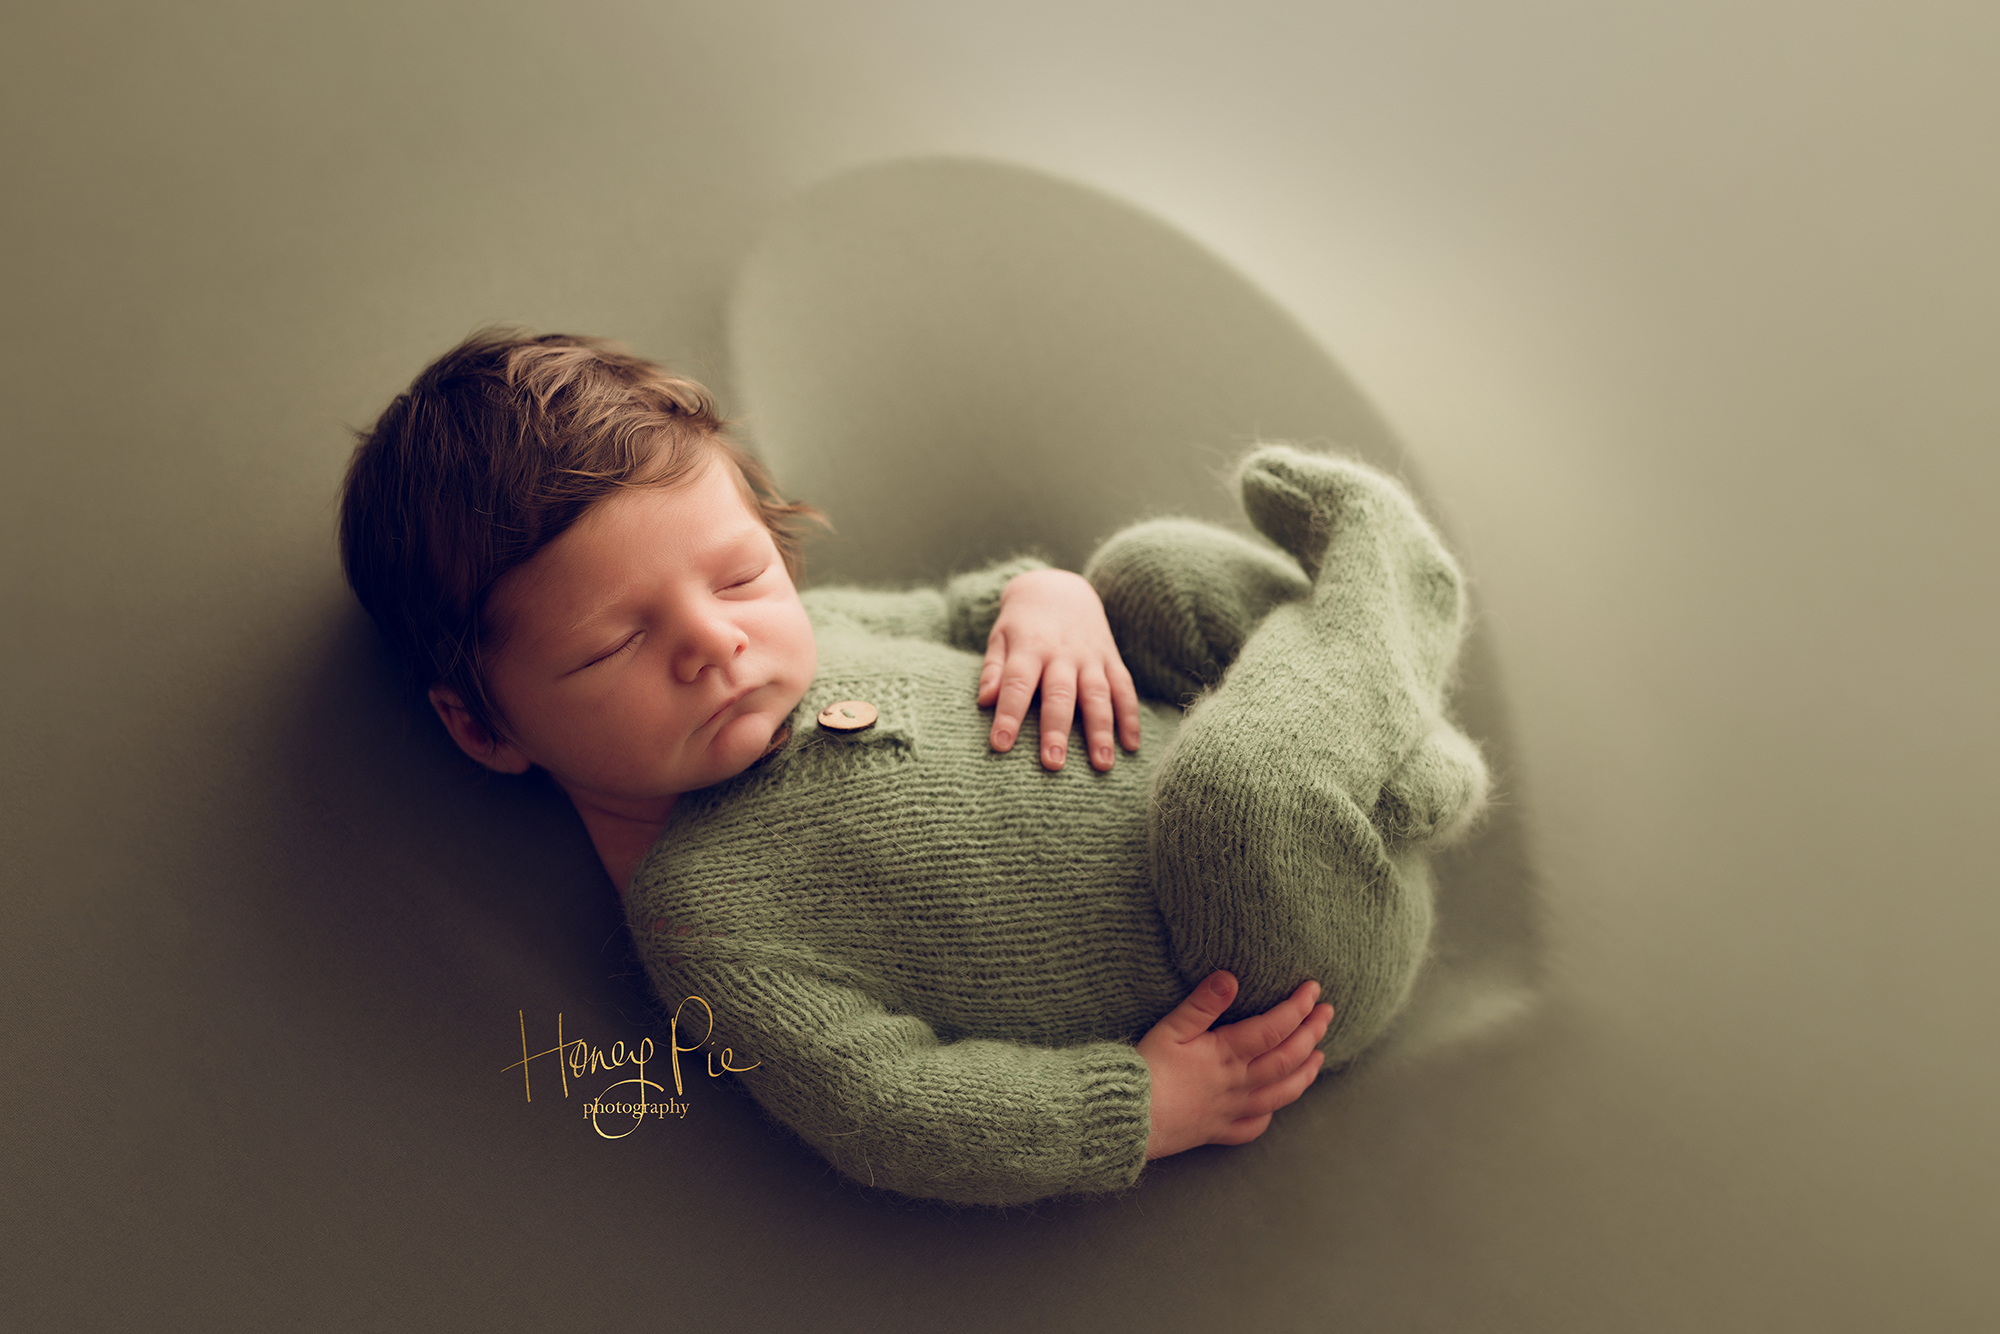 Newborn baby boy dressed in green, with lots of dark hair sleeping curled up in a heart